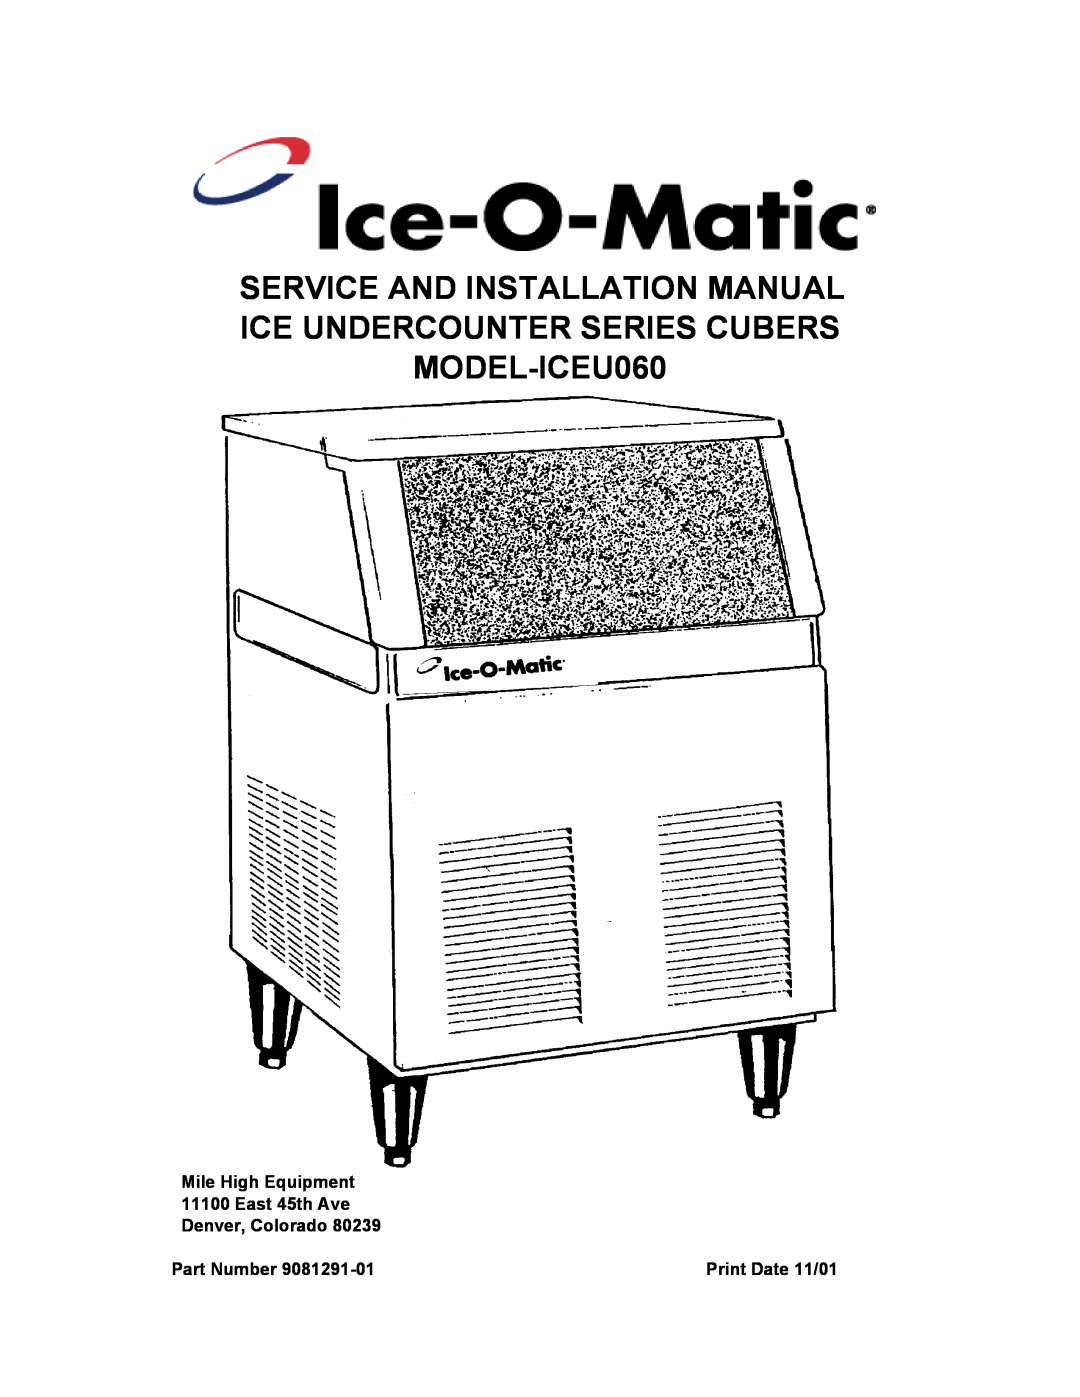 Ice-O-Matic ICEU060 installation manual Mile High Equipment 11100 East 45th Ave, Denver, Colorado, Part Number 